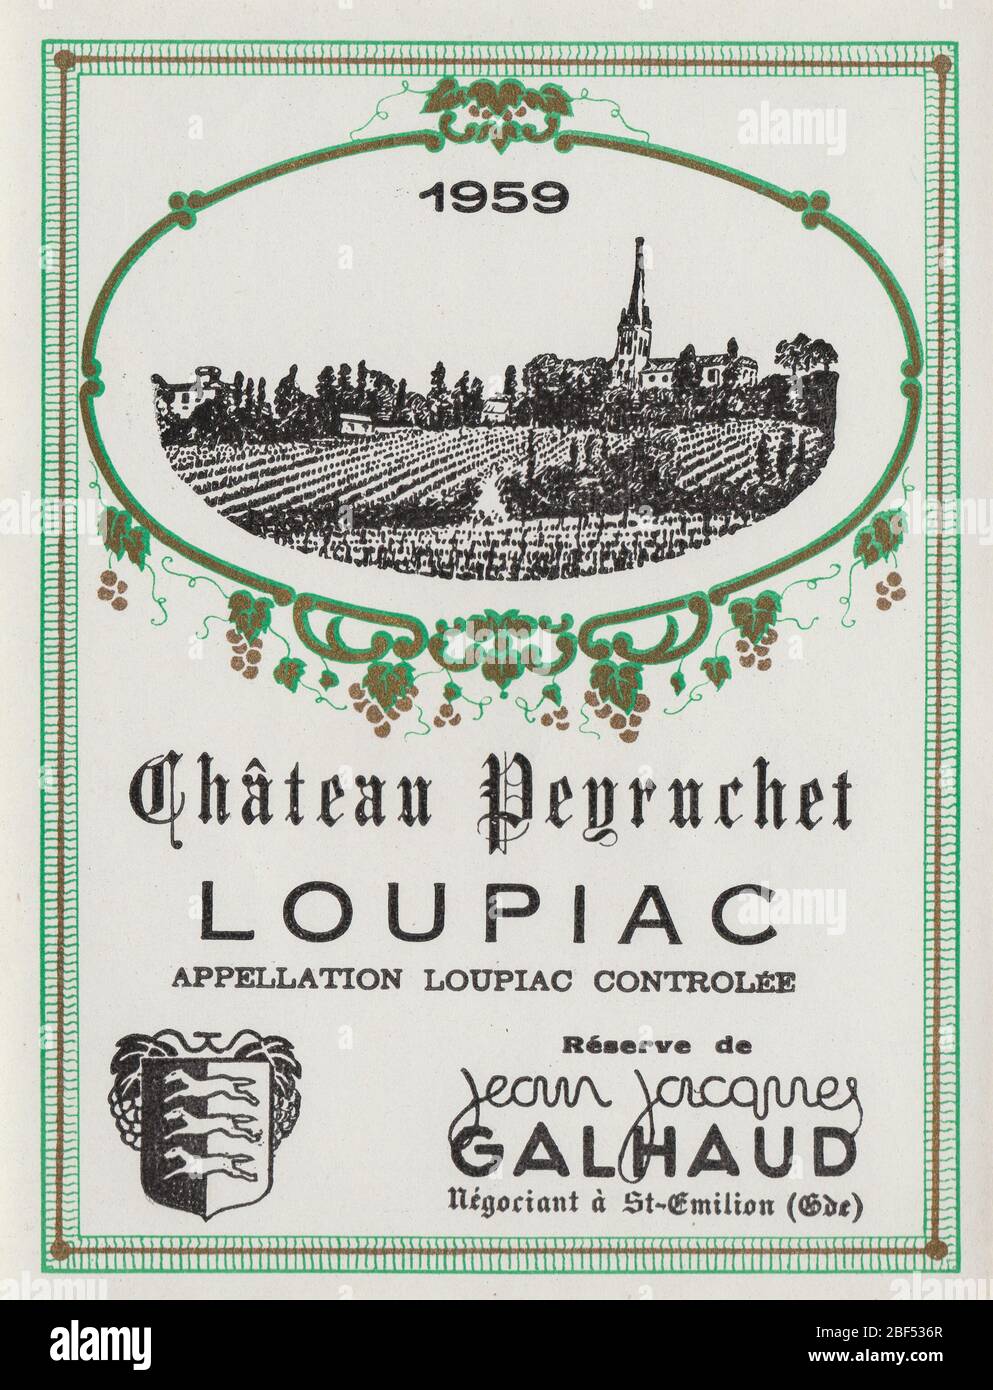 Unused vintage wine label from a 1959 Loupiac wine from Château Pegrachet, by Jean Jacques Galhaud, France Stock Photo